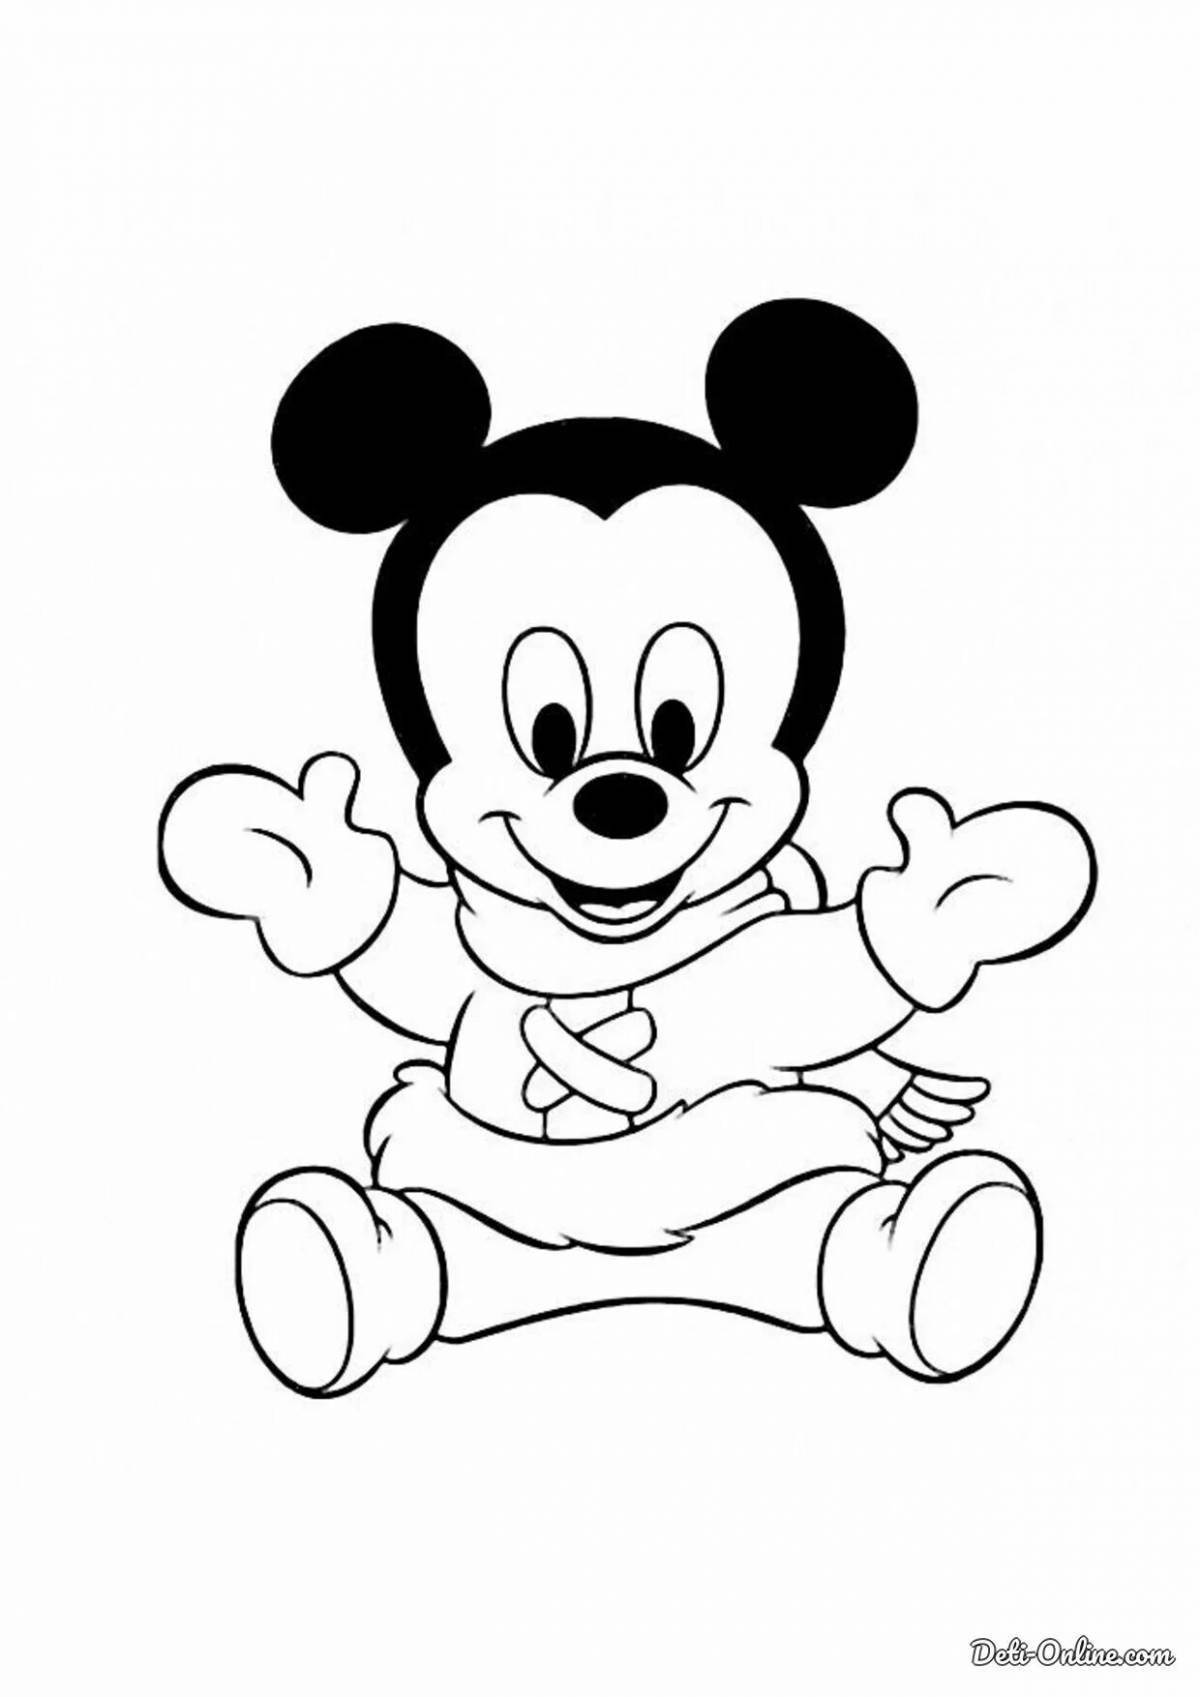 Rampant Mickey Mouse Coloring Book for Kids